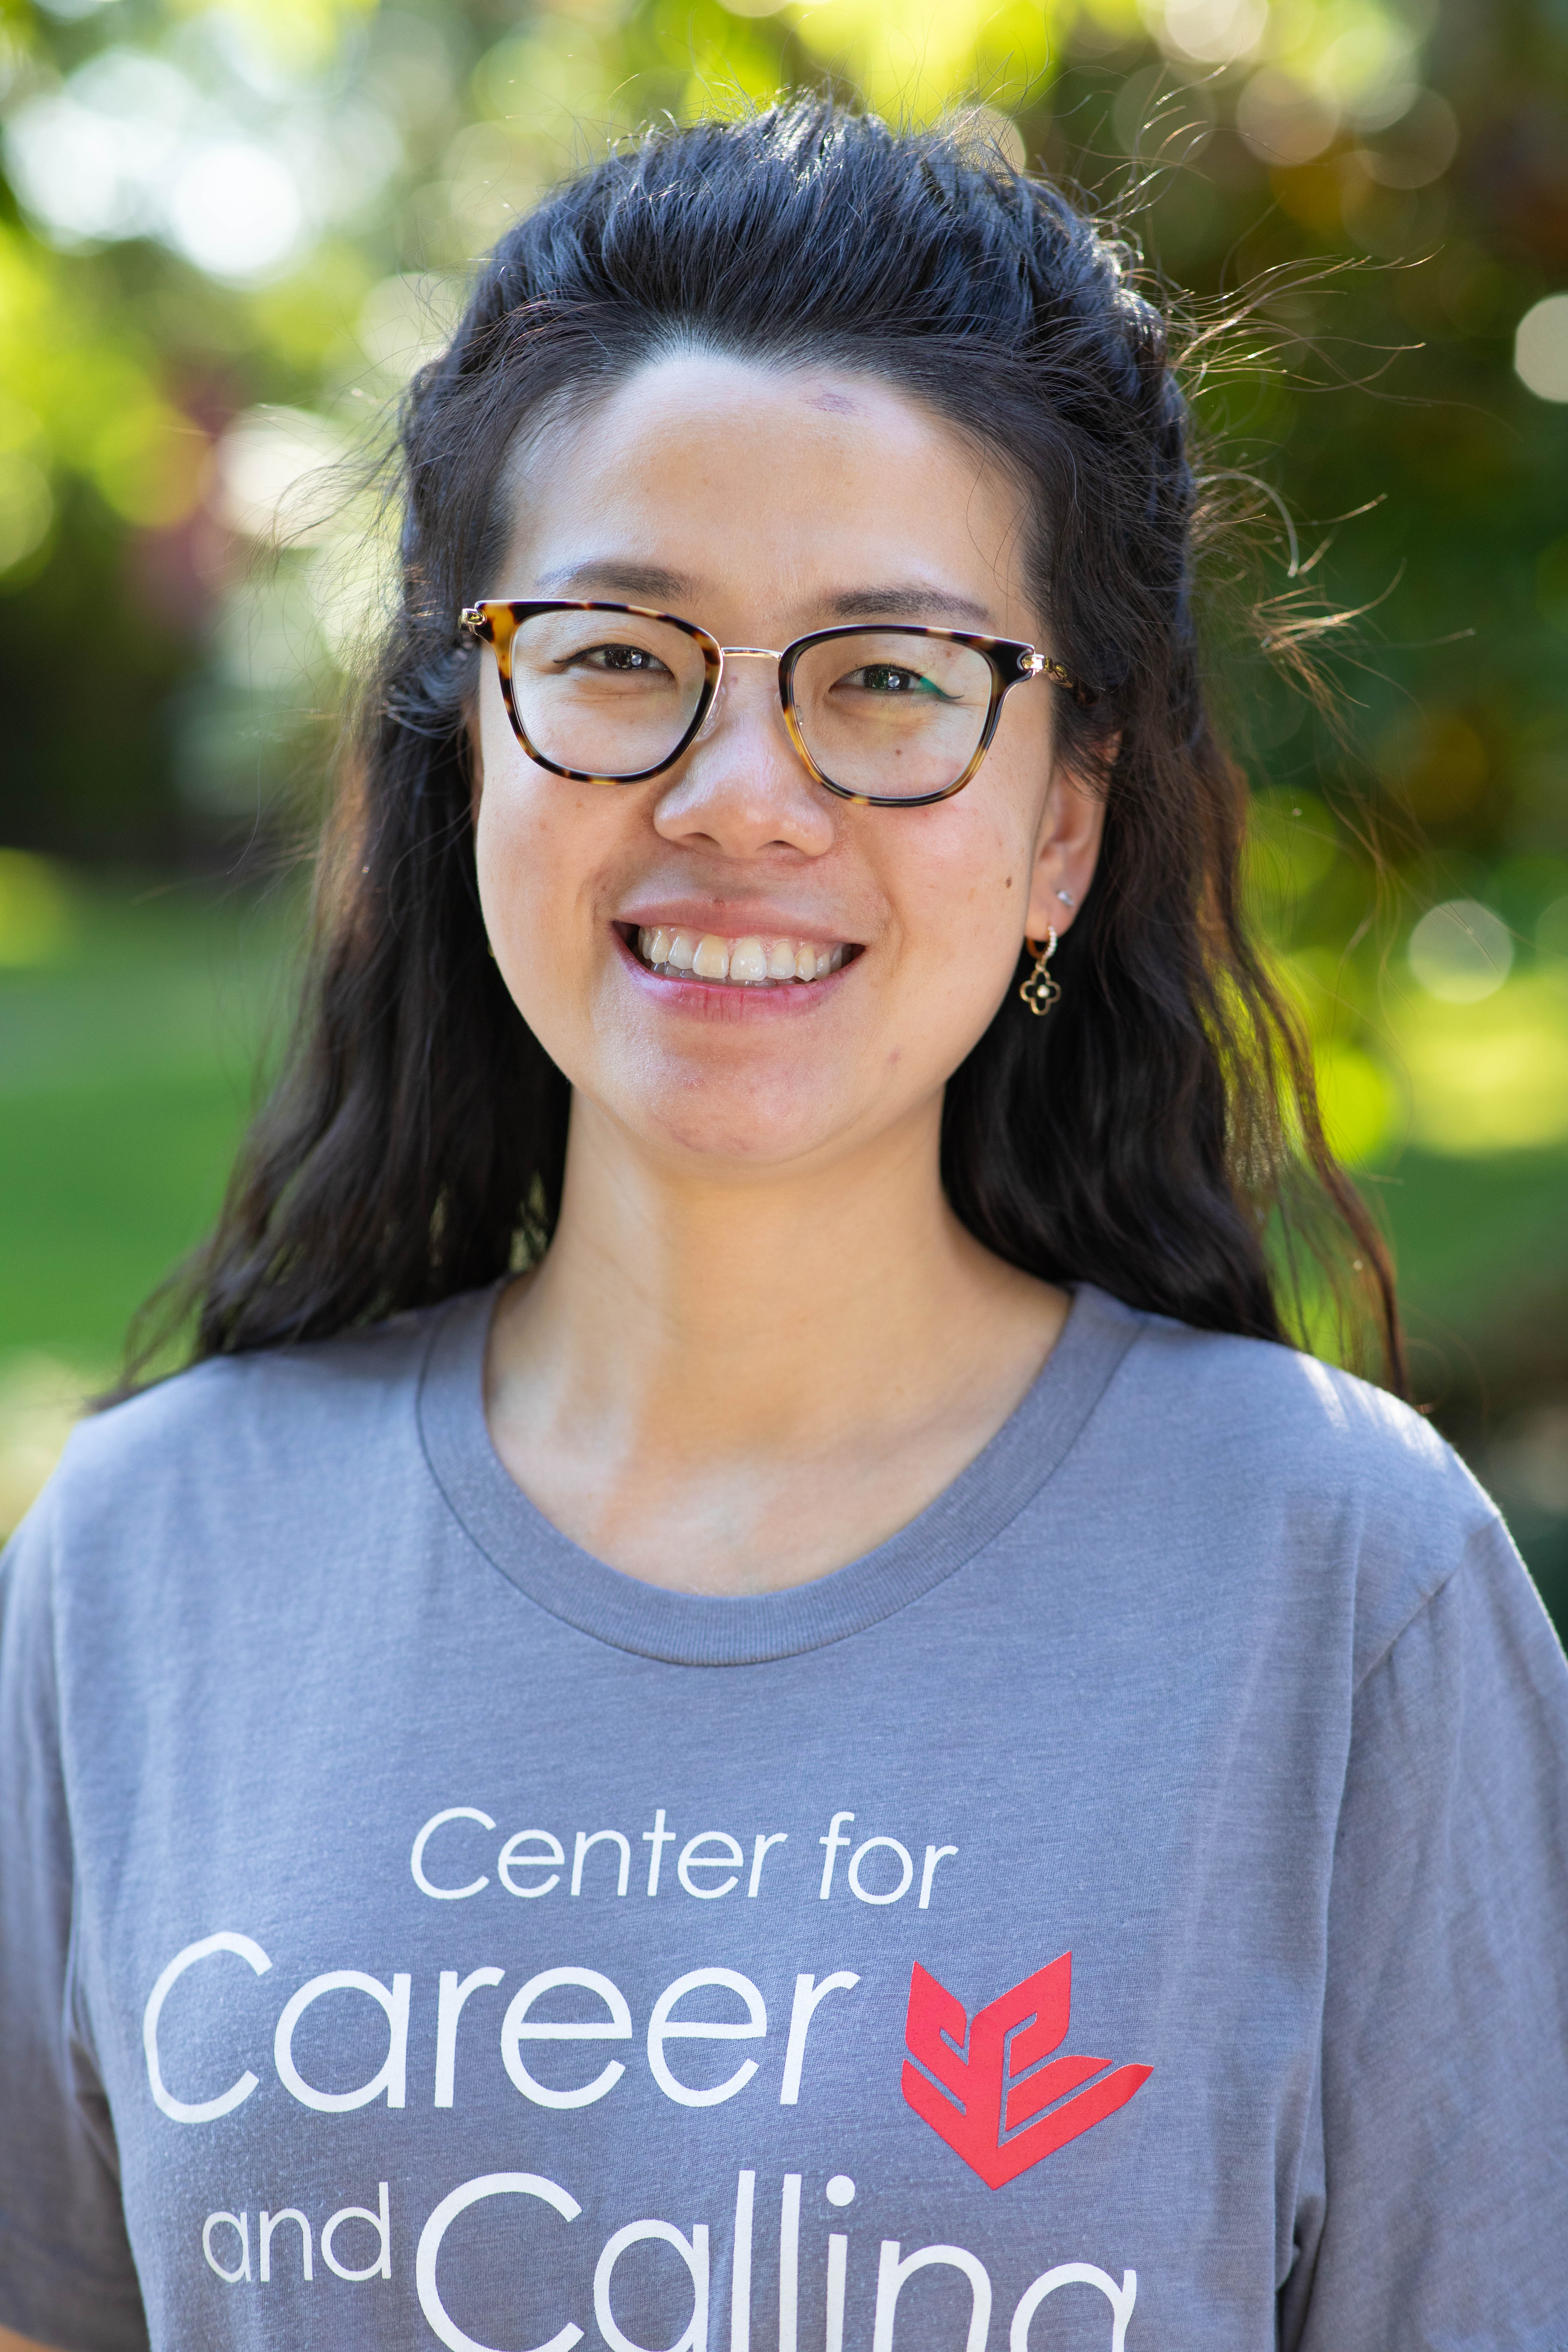 veronica zhu, director of the center for career and calling